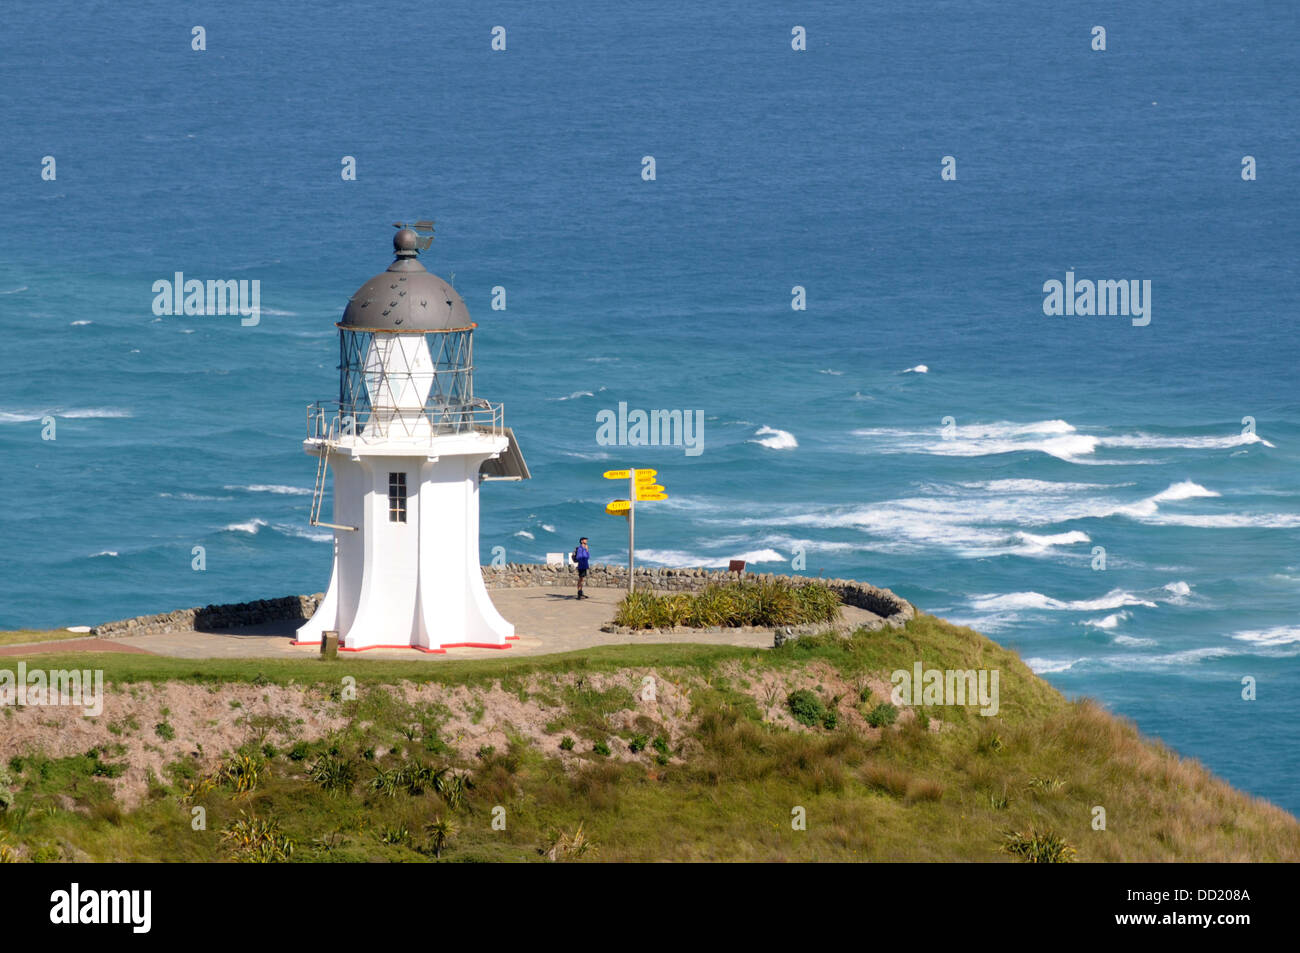 The lighthouse which stands at Cape Reinga -the Northern most tip of NZ - facing the South Pacific Ocean  Ocean Stock Photo